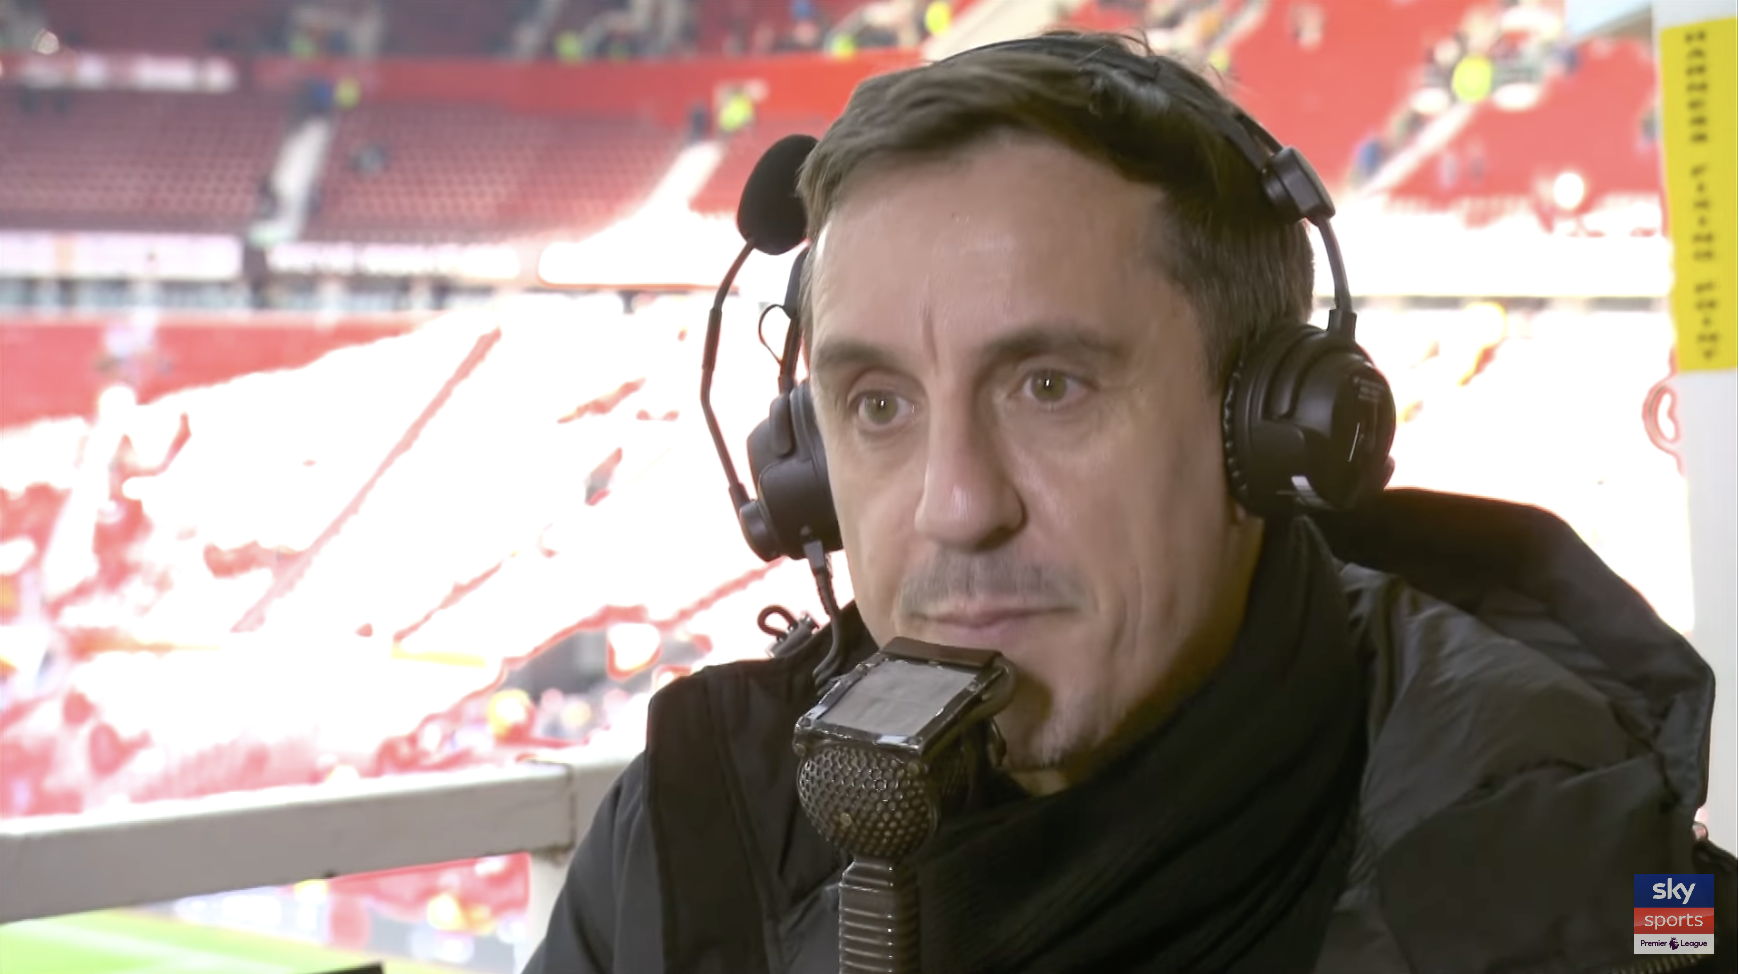 The Gary Neville Podcast: Rashford in sensational form | Man Utd fans keen on takeover | Long way to go in PL title race